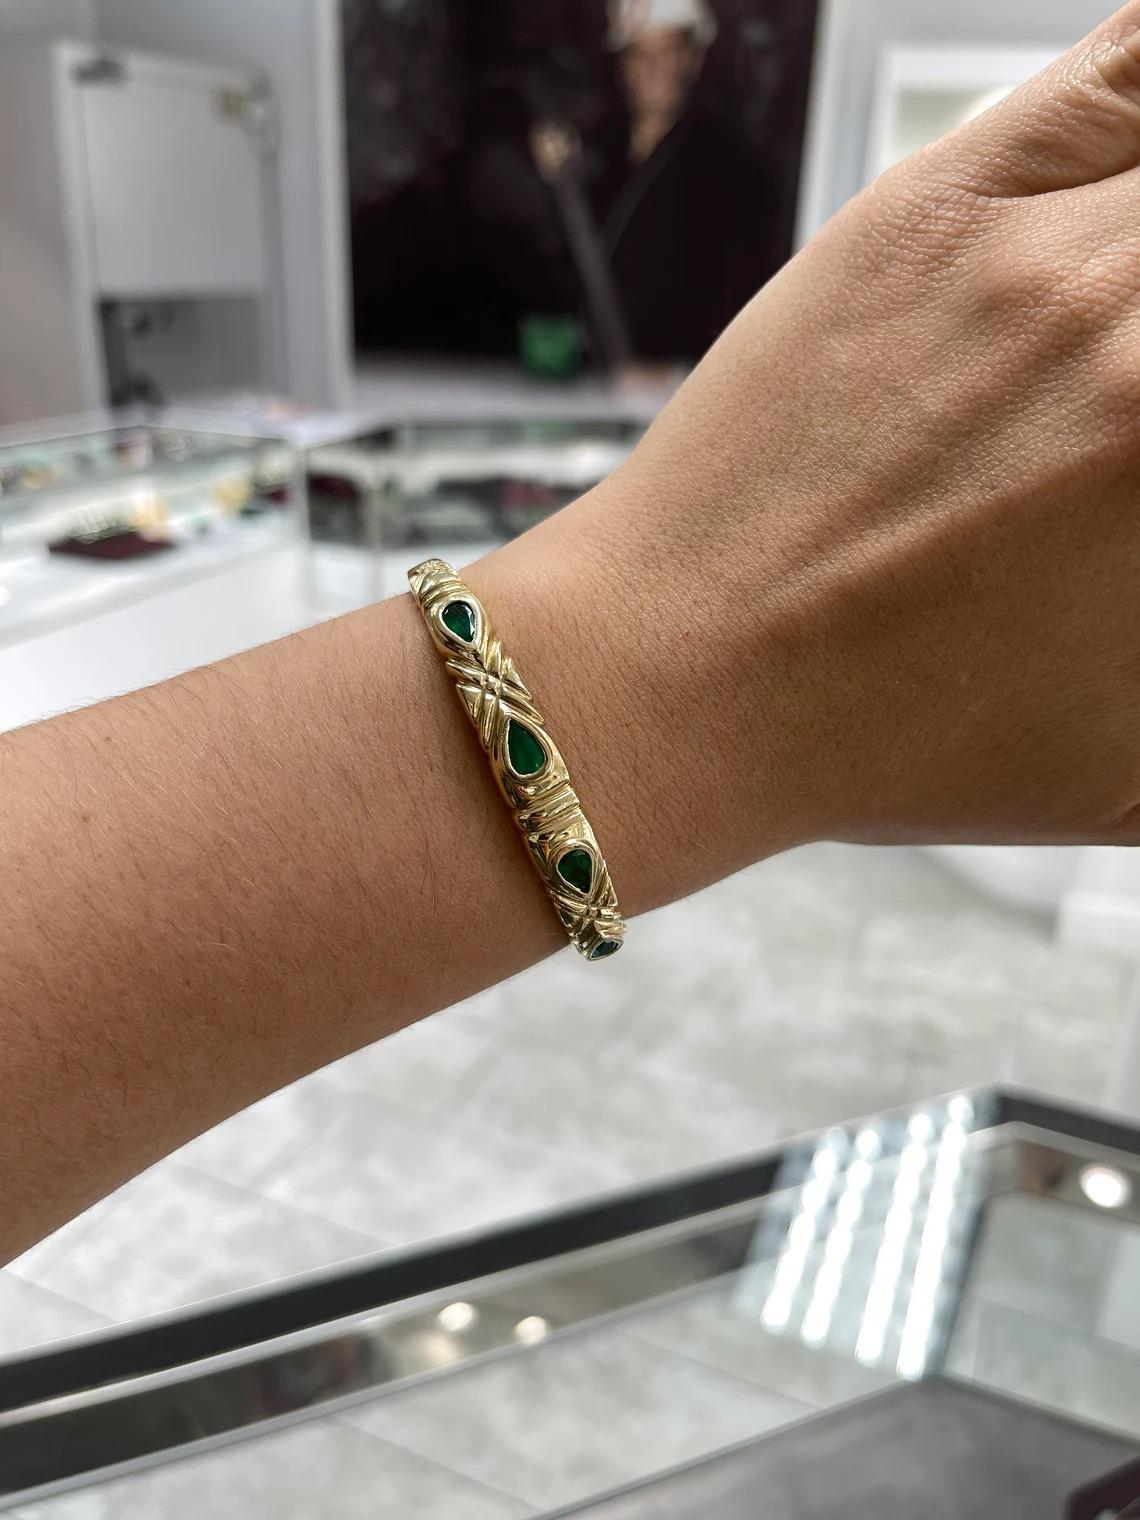 Bracelet Style: Bangle
Bracelet Length: 7 inches
Bracelet Width: 9.30mm

Setting Style: Bezel
Setting Material: 14K Yellow Gold
Setting Weight: 19.01 Grams

Main Stone: Emerald
Shape: Pear Cut
Weight: 2.0-Carats (Total)
Clarity: Transparent
Color: